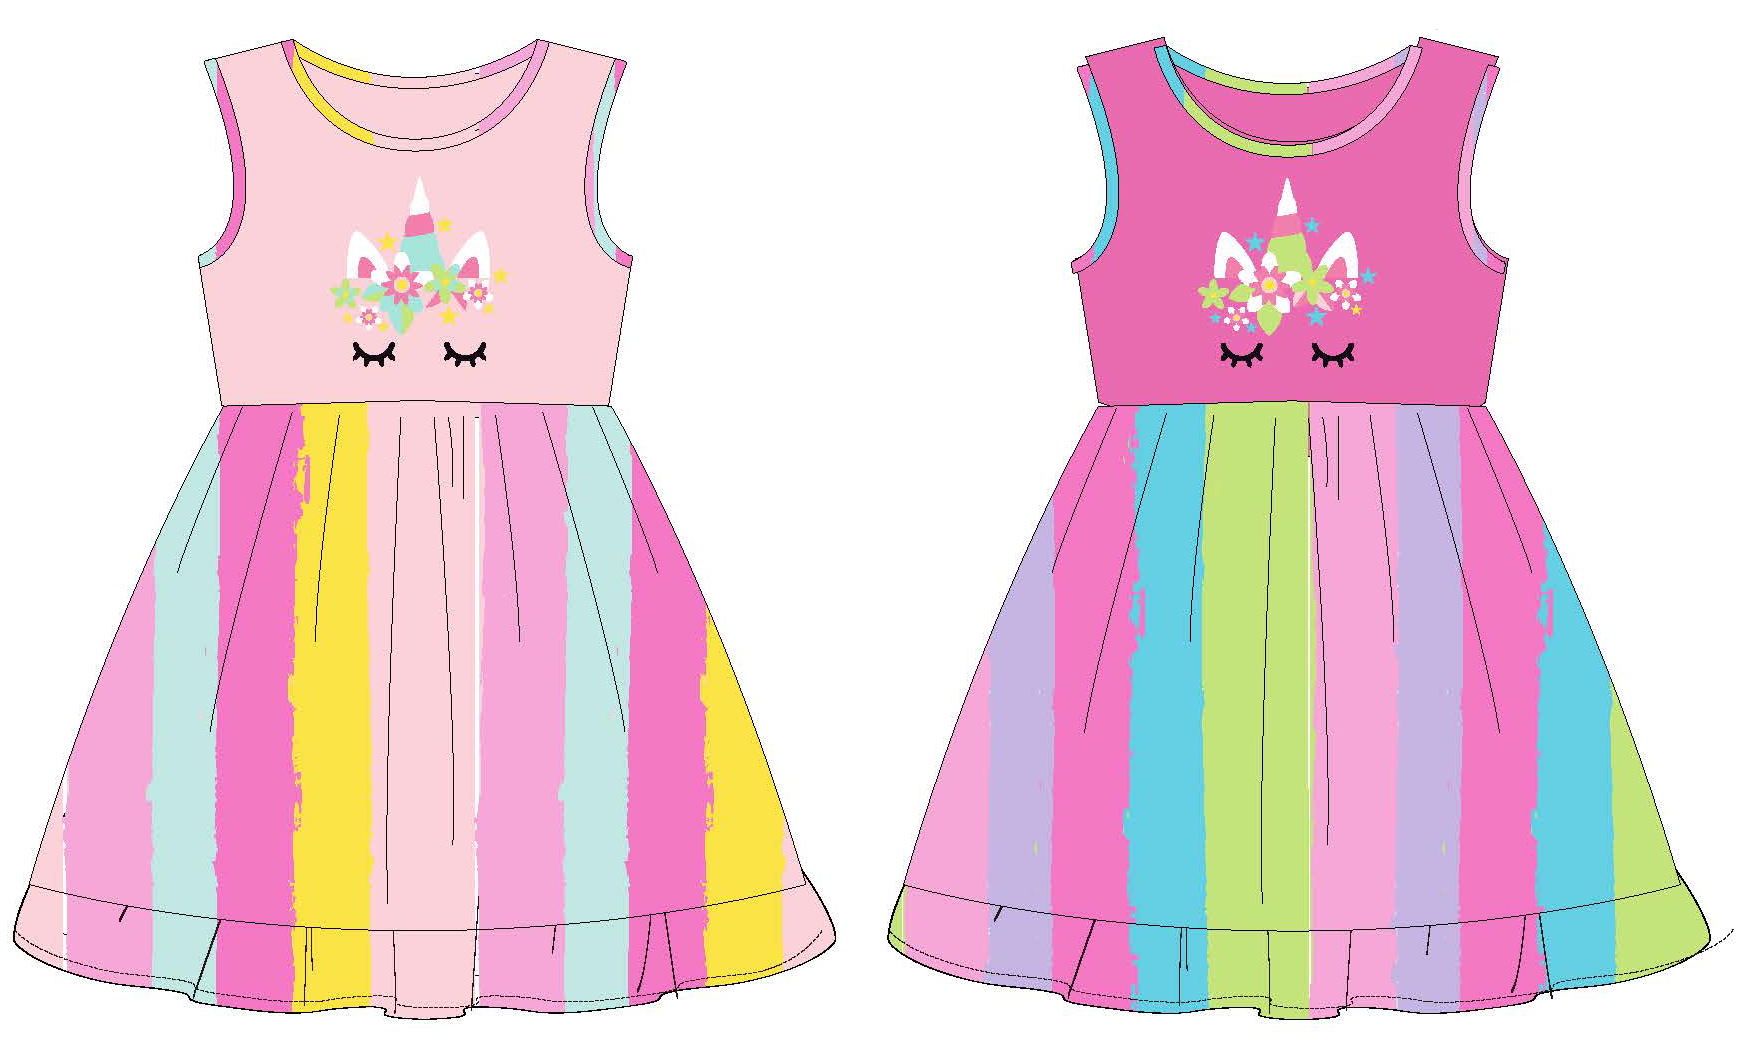 Toddler Girl's Sleeveless Rainbow Knit Dress w/ Embroidered UNICORN - Size 2T-4T